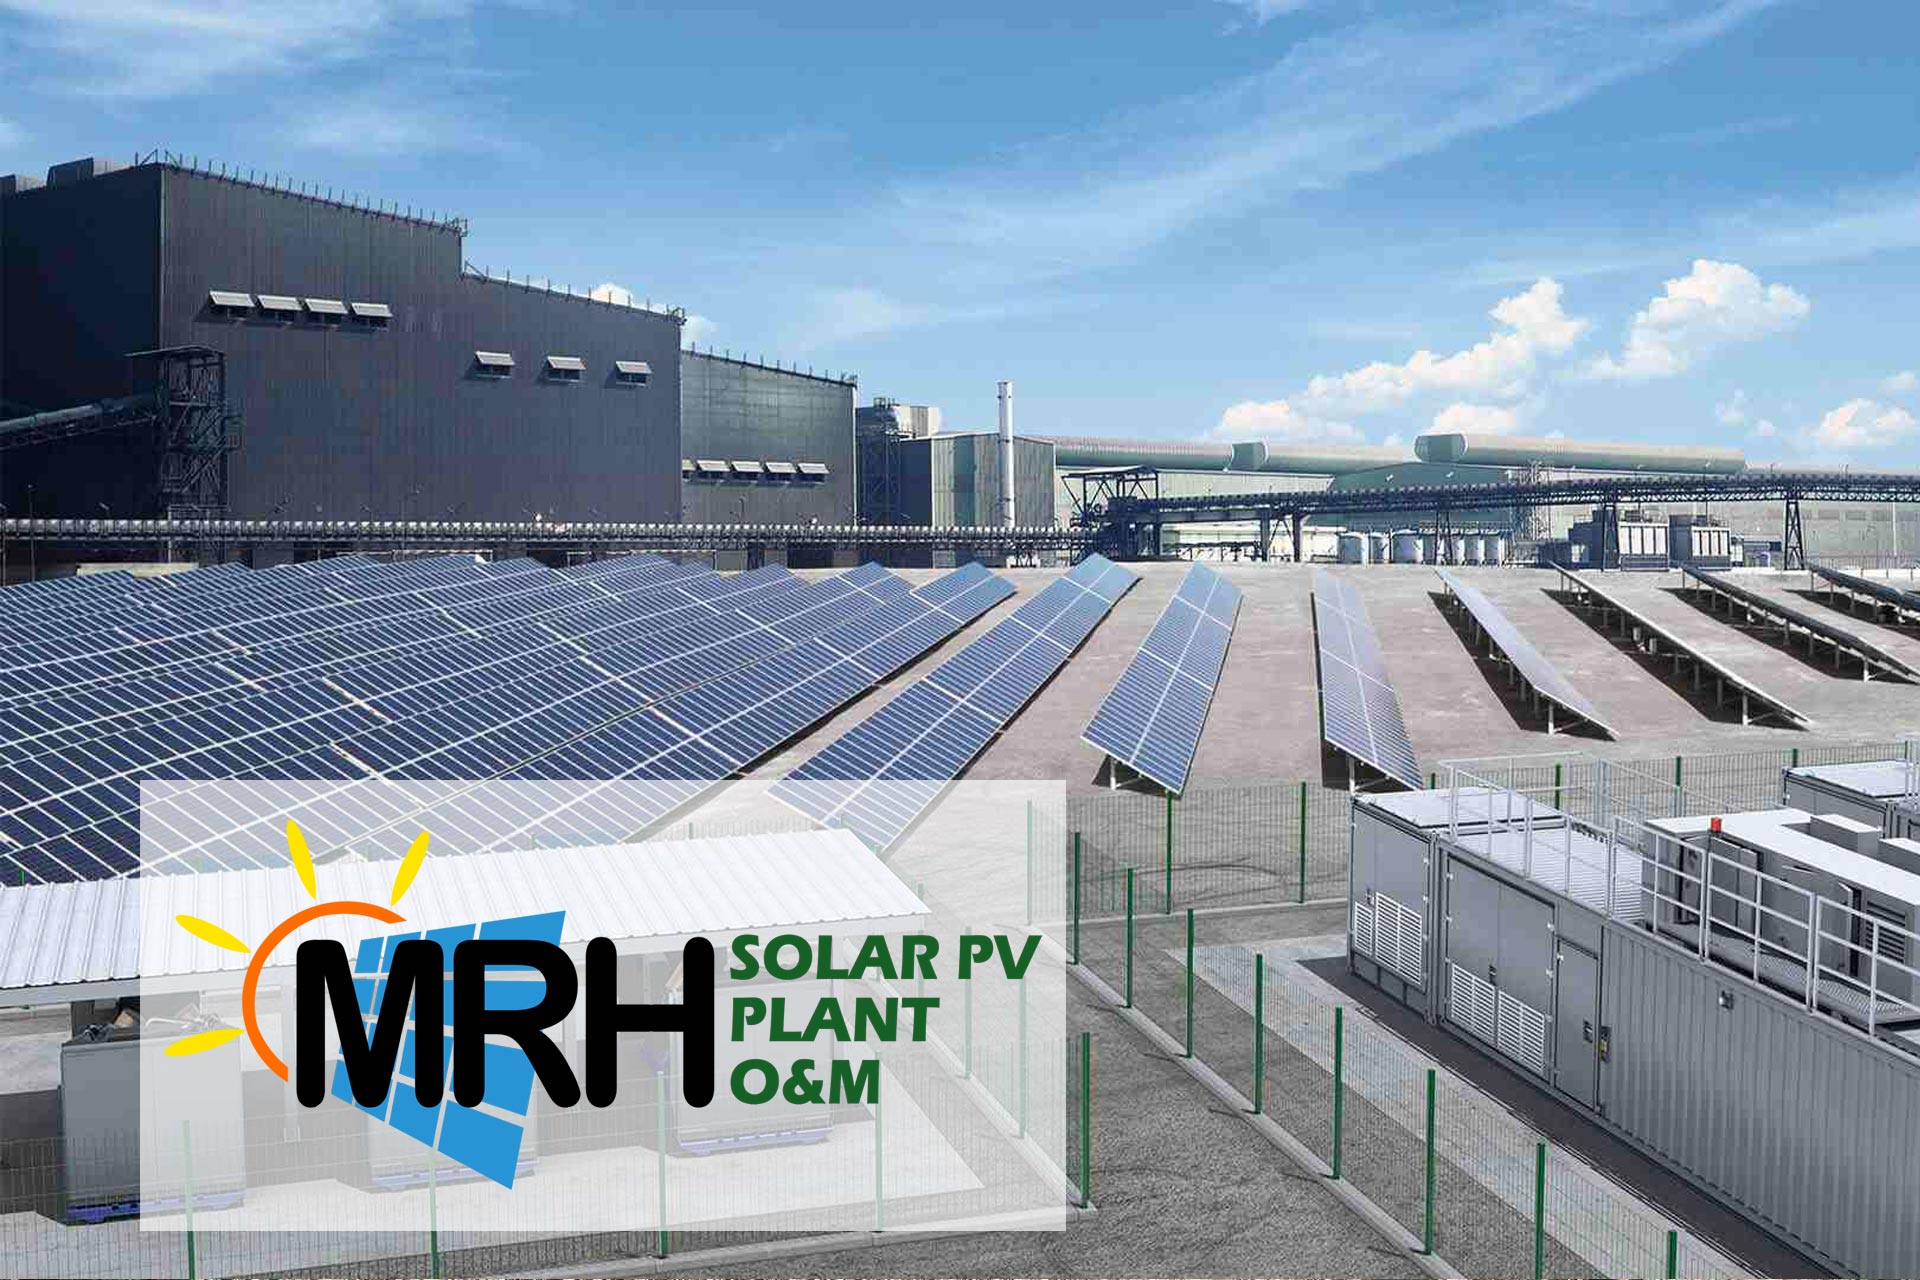 MRH Solar PV and OM